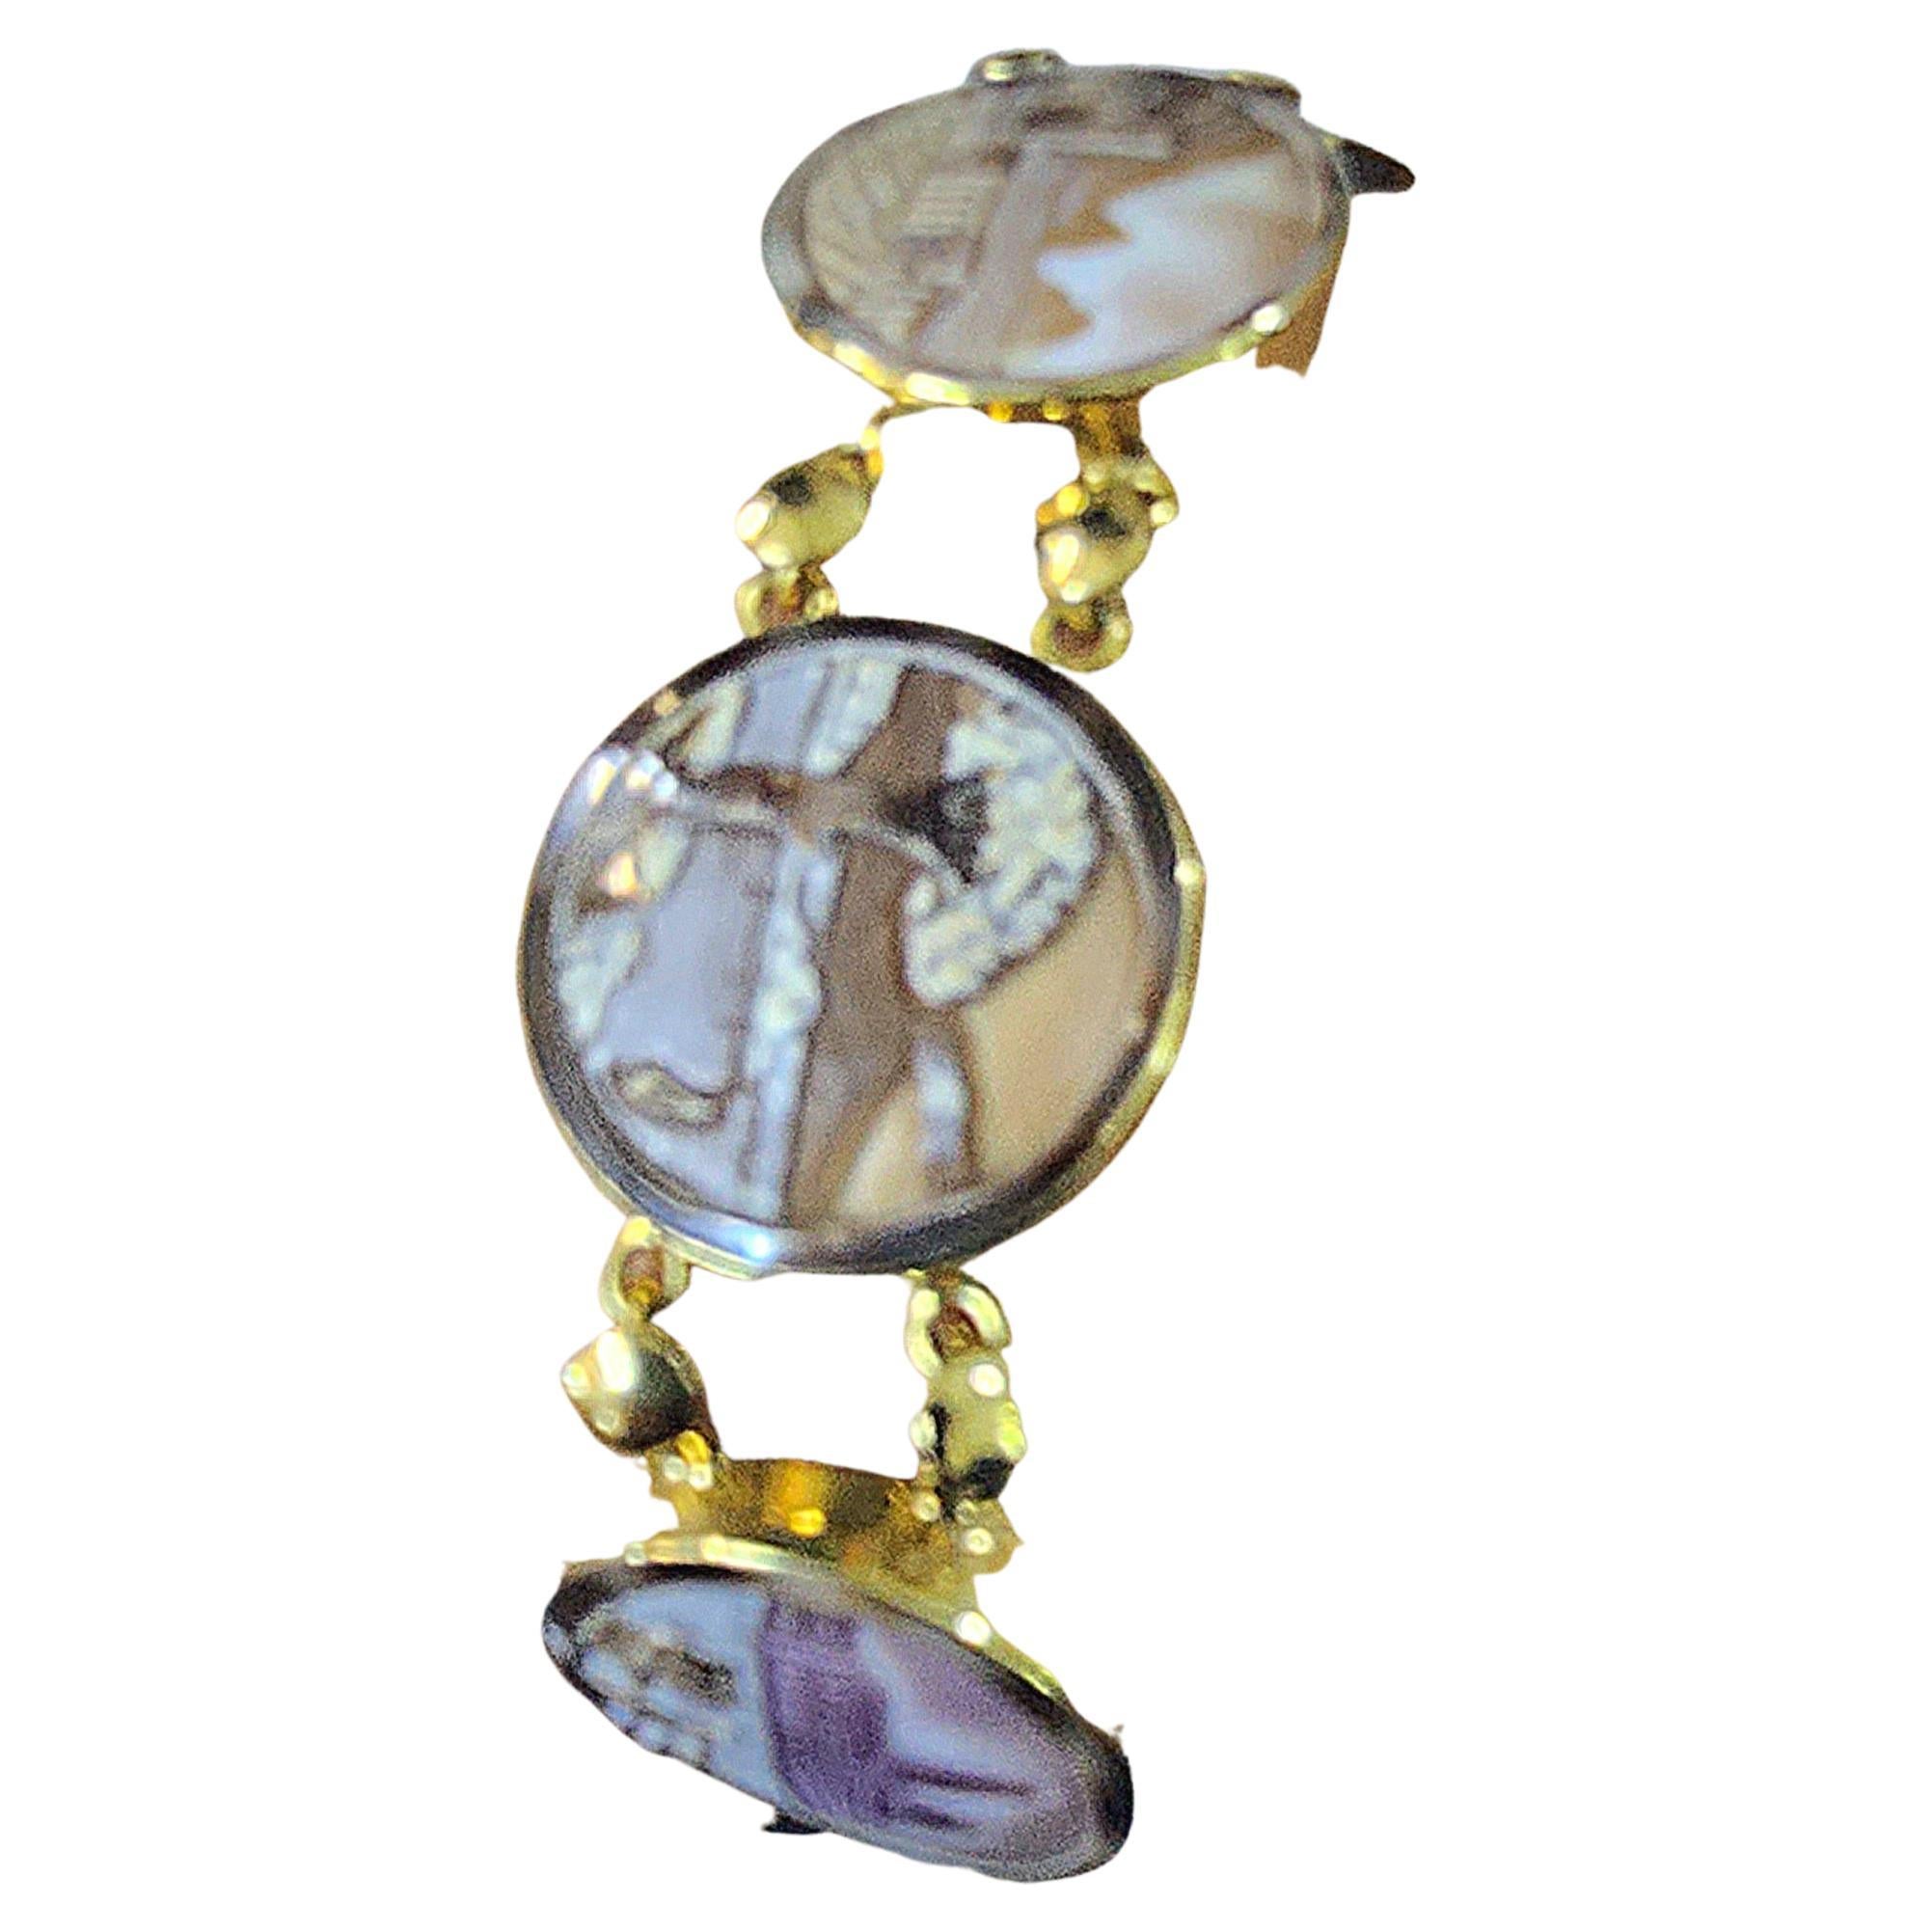 Vintage 18k gold bracelet in engraved natural shell cameo rome hestorical sights in 18k gold settings 28.4 grams 18.5 cm lenght and cameo diameter 2.1 cm width bracelet was made in italy between 1950s 